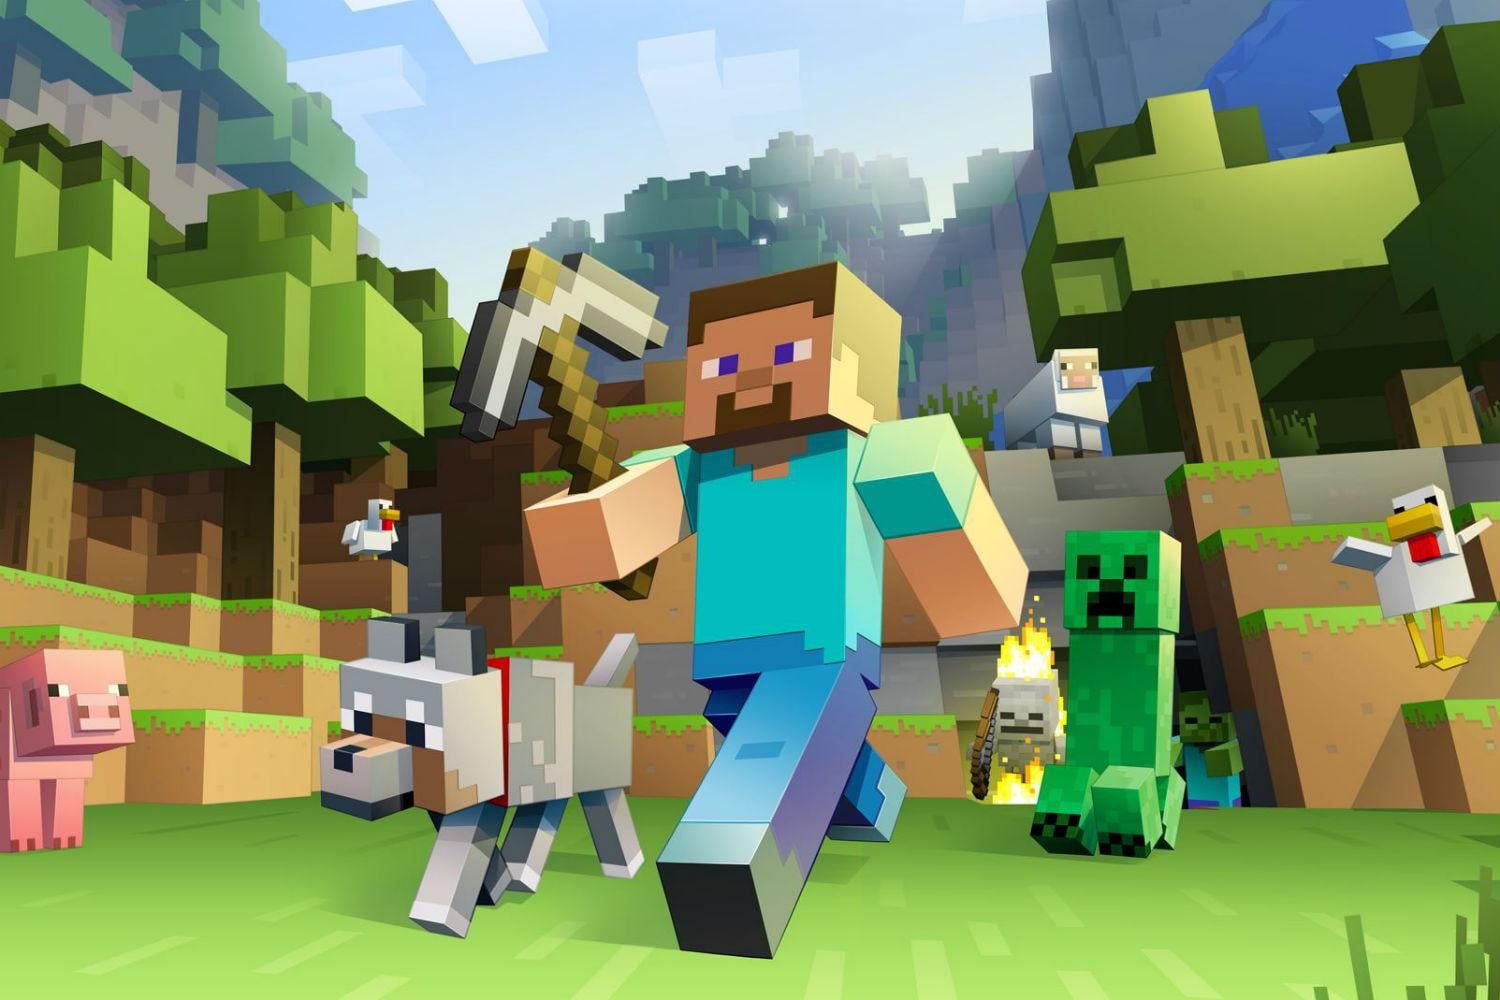 Facebook Is Using Minecraft To Train AI Assistants, One Block At A